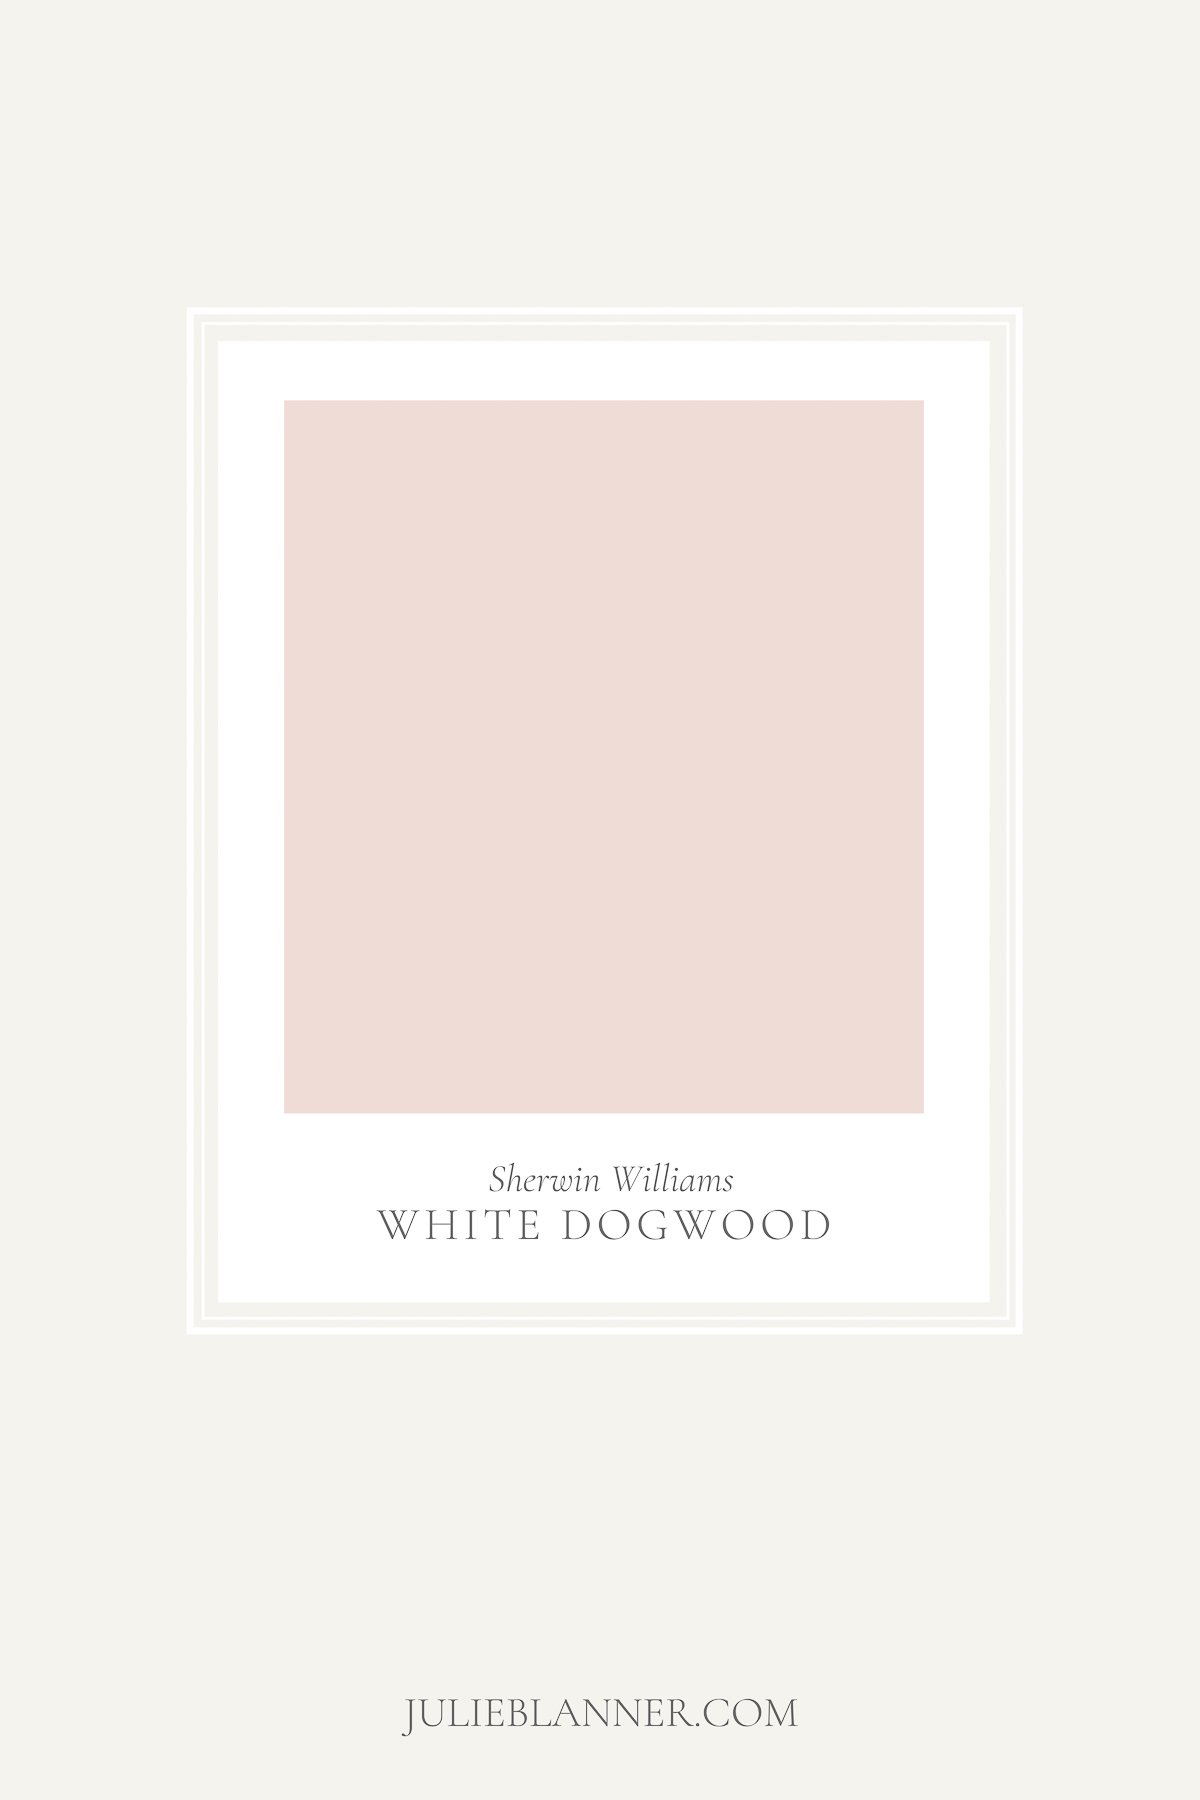 A paint sample card of Sherwin Williams White Dogwood, as part of a blush pink paint guide at julieblanner.com